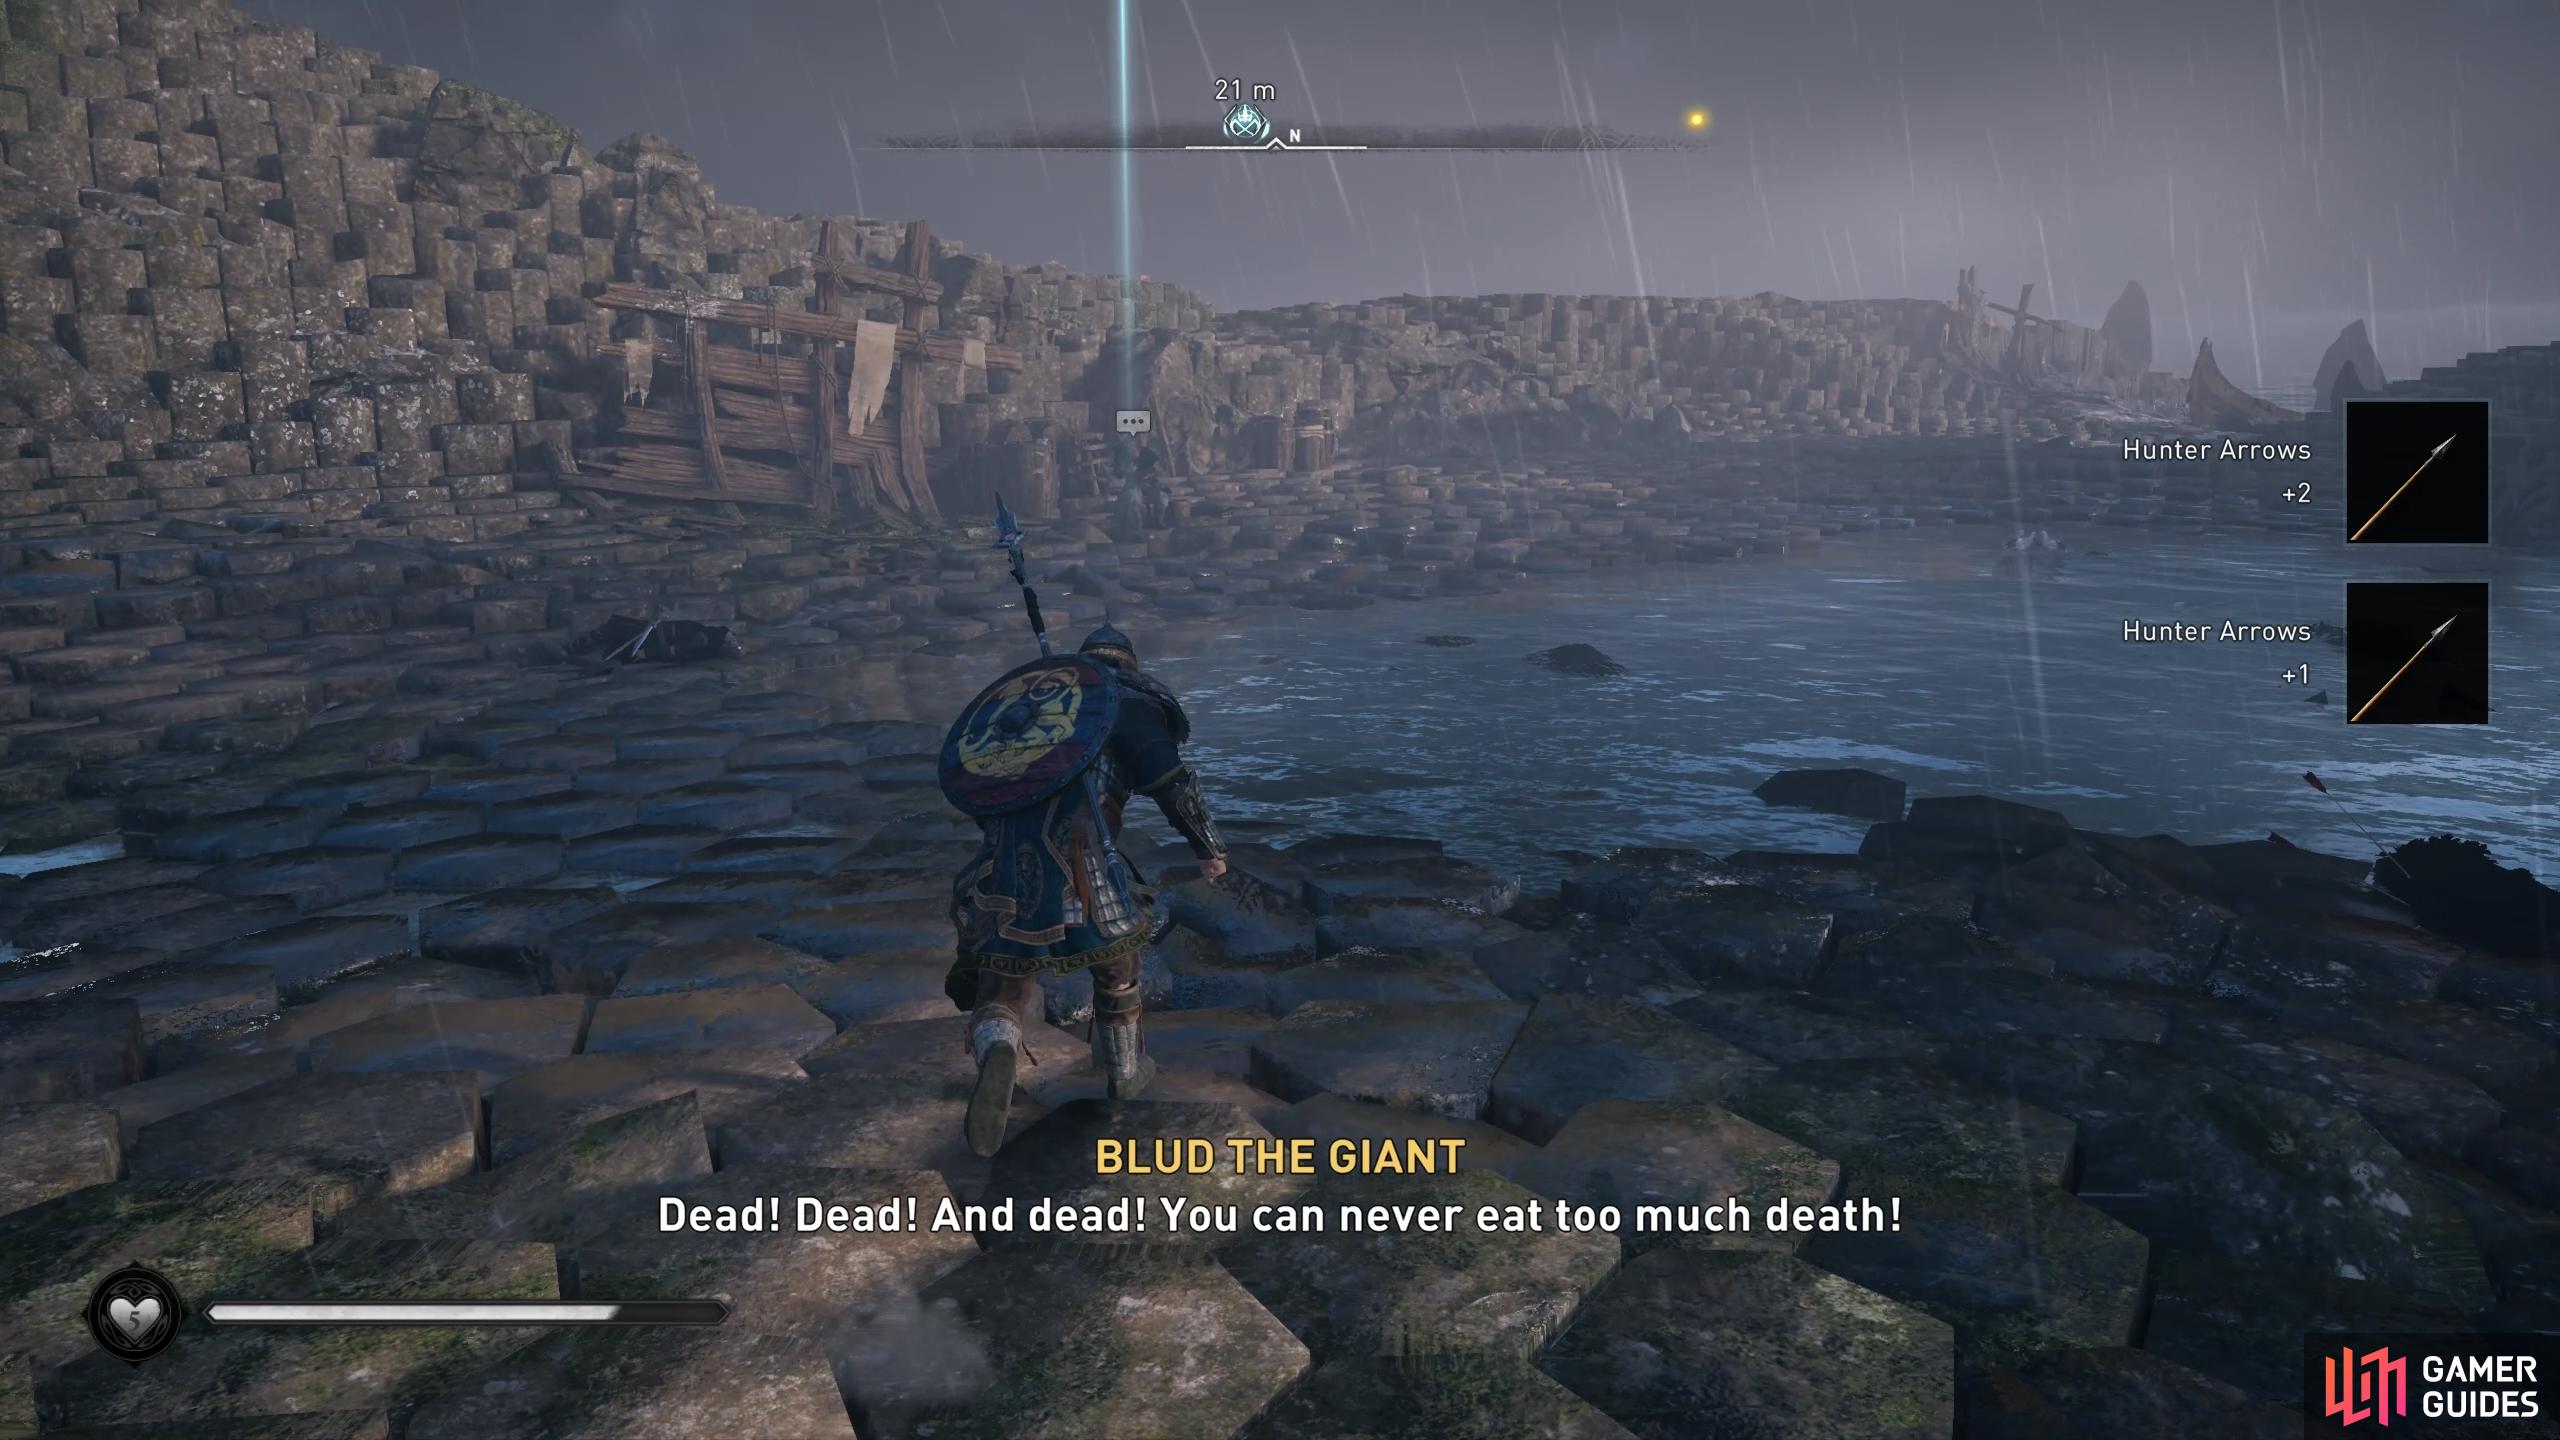 Speak with Blud the Giant and then defeat her to obtain the Dublin Champion Armor.